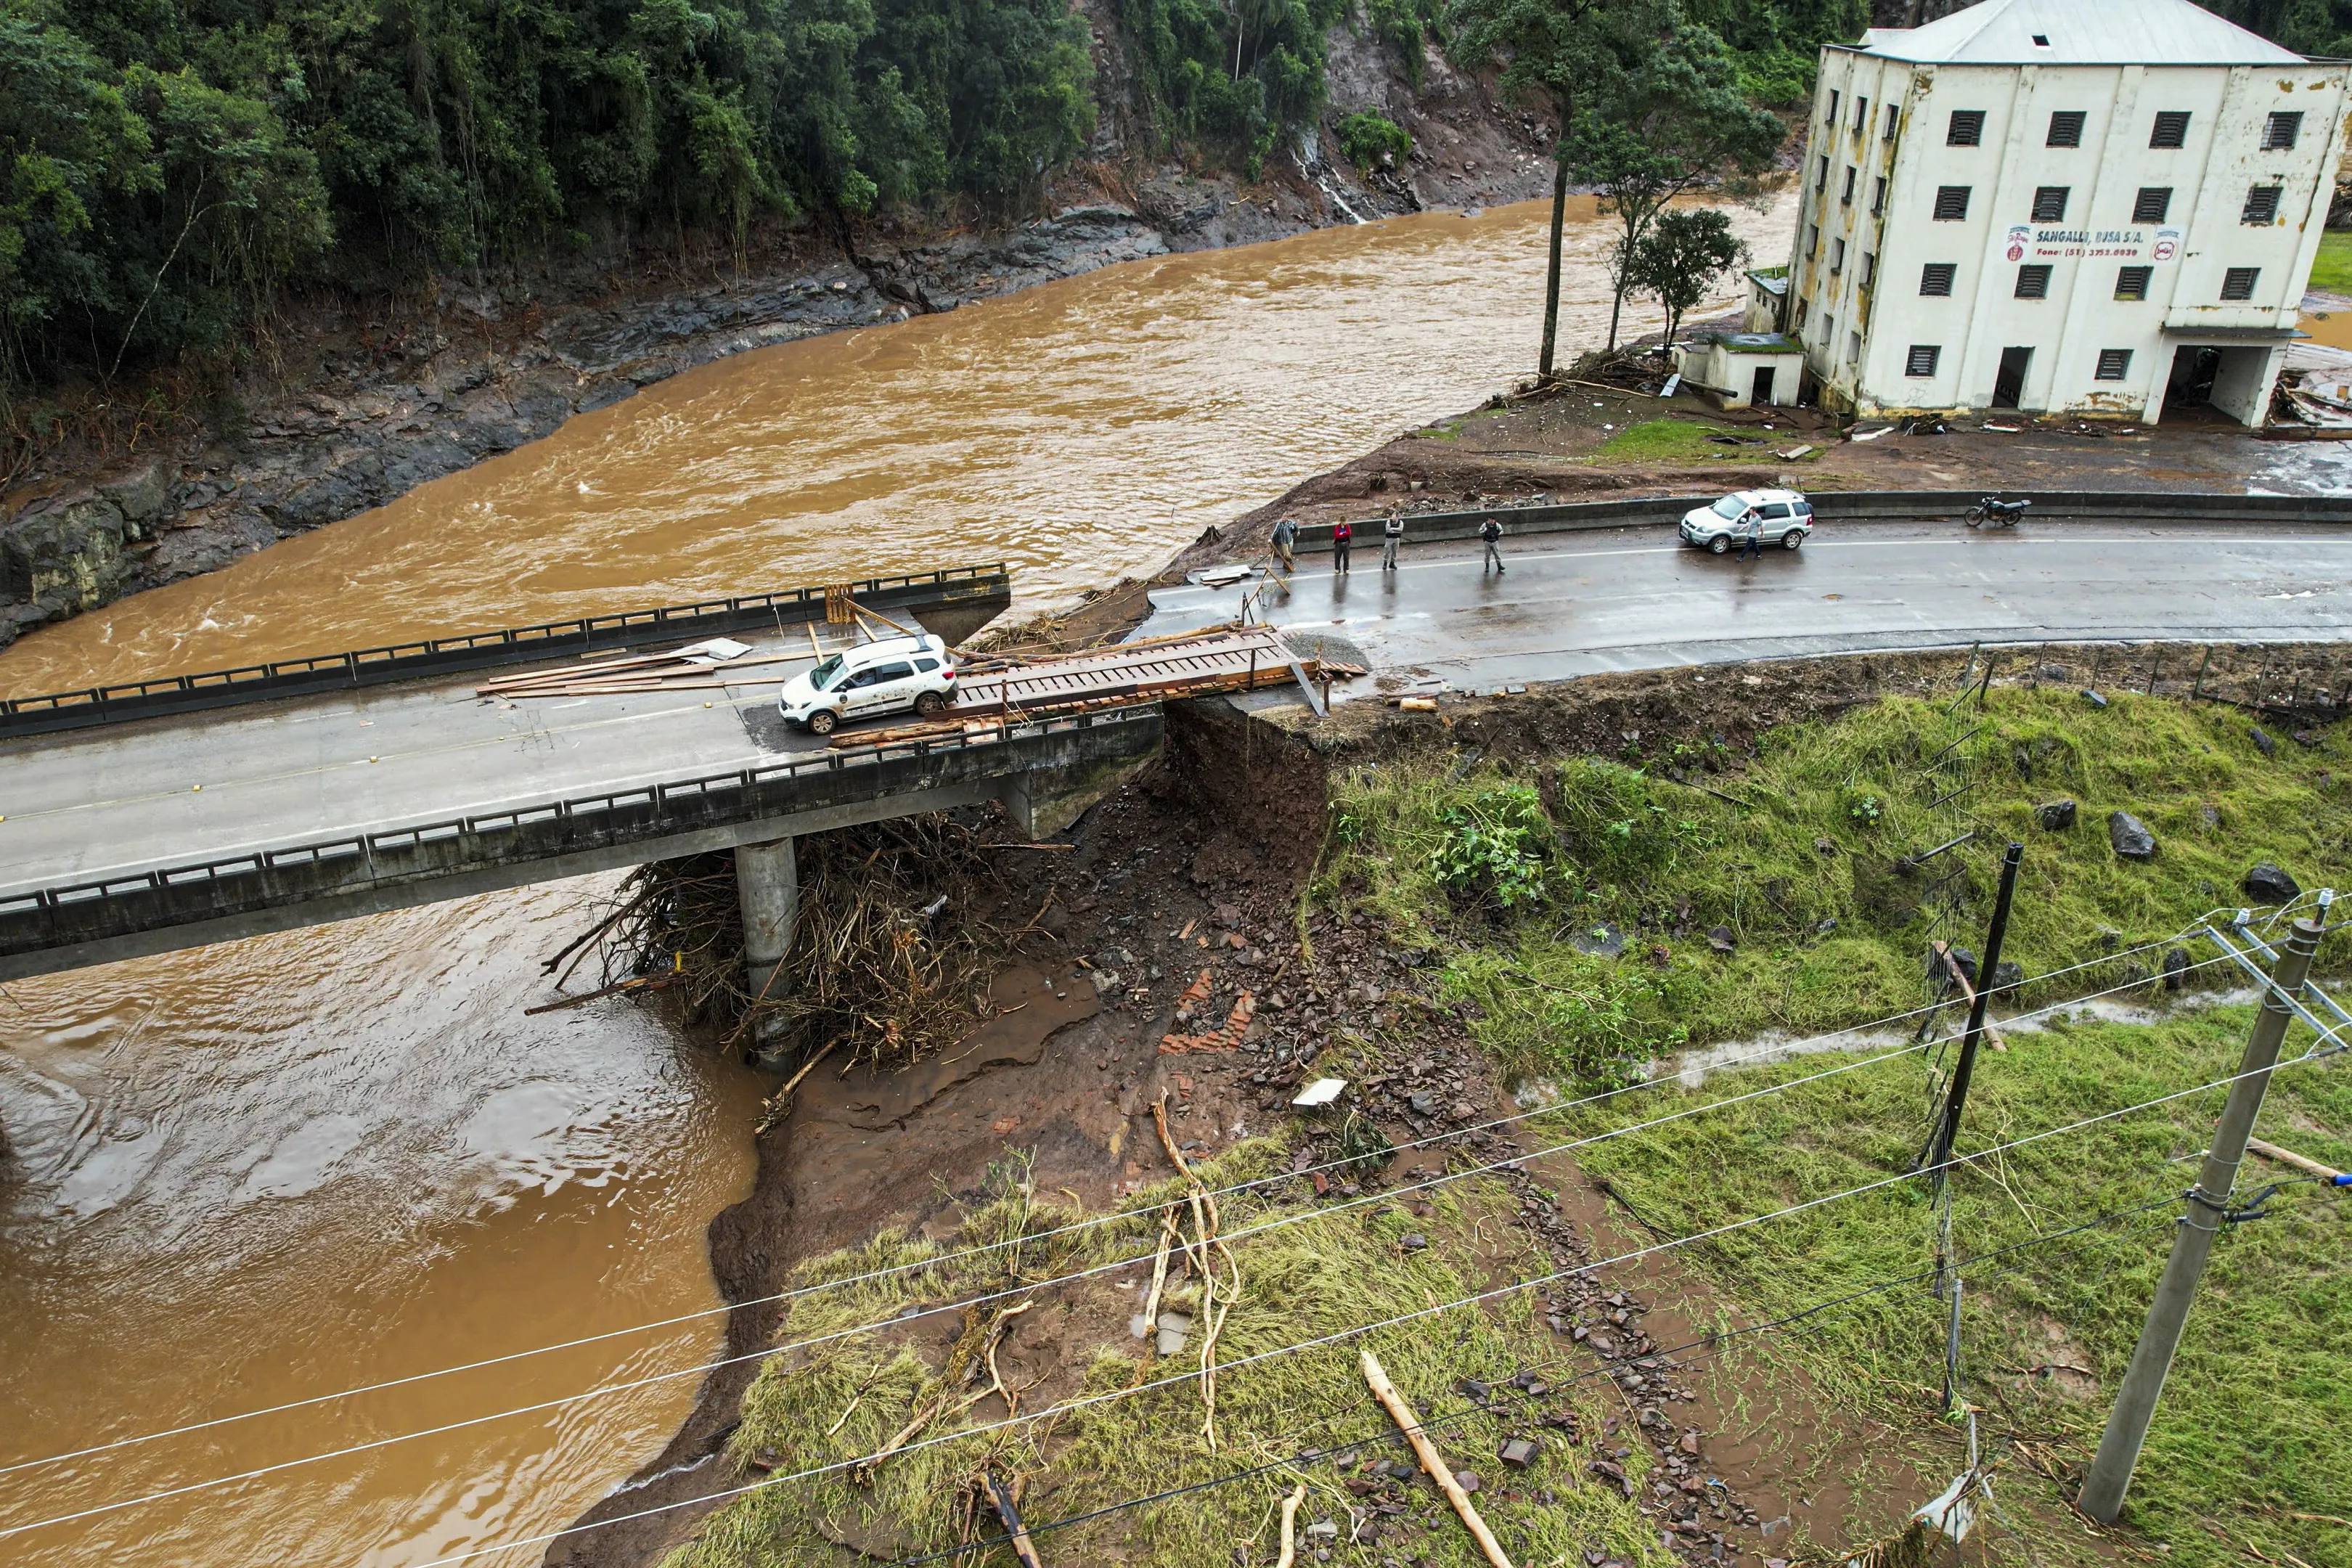 Aerial view of a bridge partially destroyed by floods in Encantado, Rio Grande do Sul state, Brazil on May 5, 2024. Authorities in southern Brazil scrambled Sunday to rescue people from raging floods and mudslides in what has become the region's largest ever climate catastrophe, with at least 78 dead and 115,000 forced from their homes. (Photo by Gustavo Ghisleni / AFP)